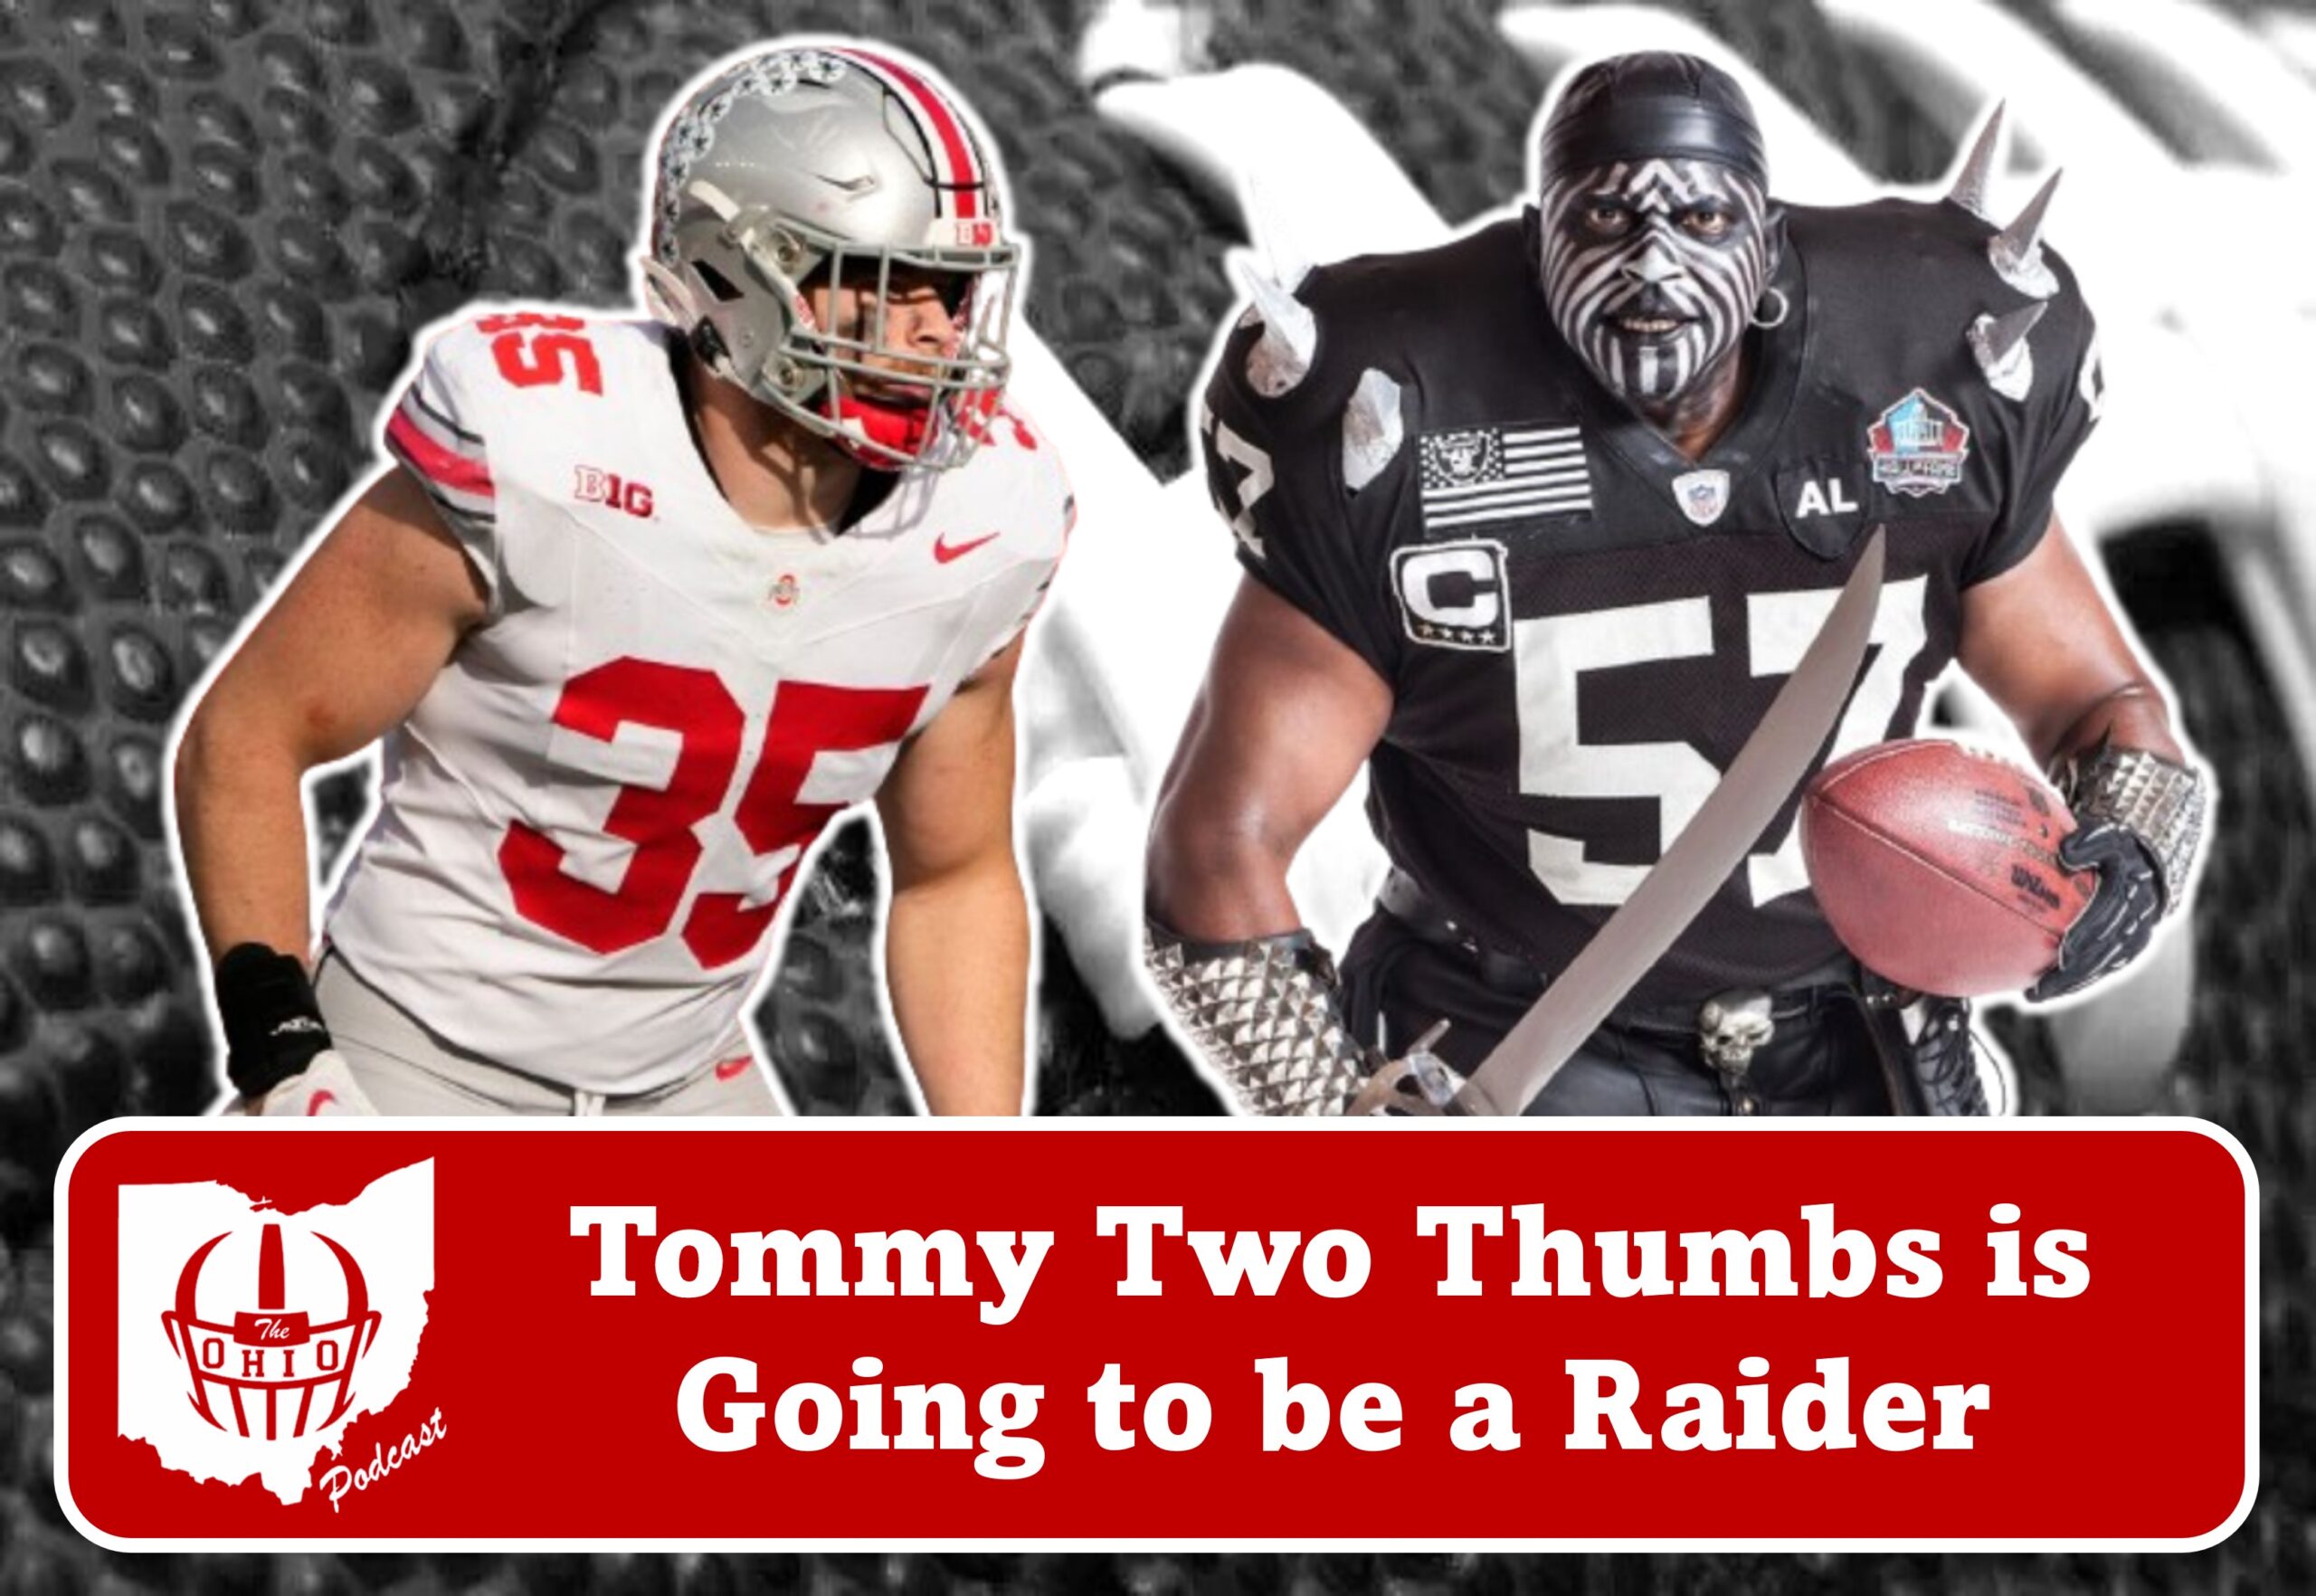 Tommy is Going to be a Raider